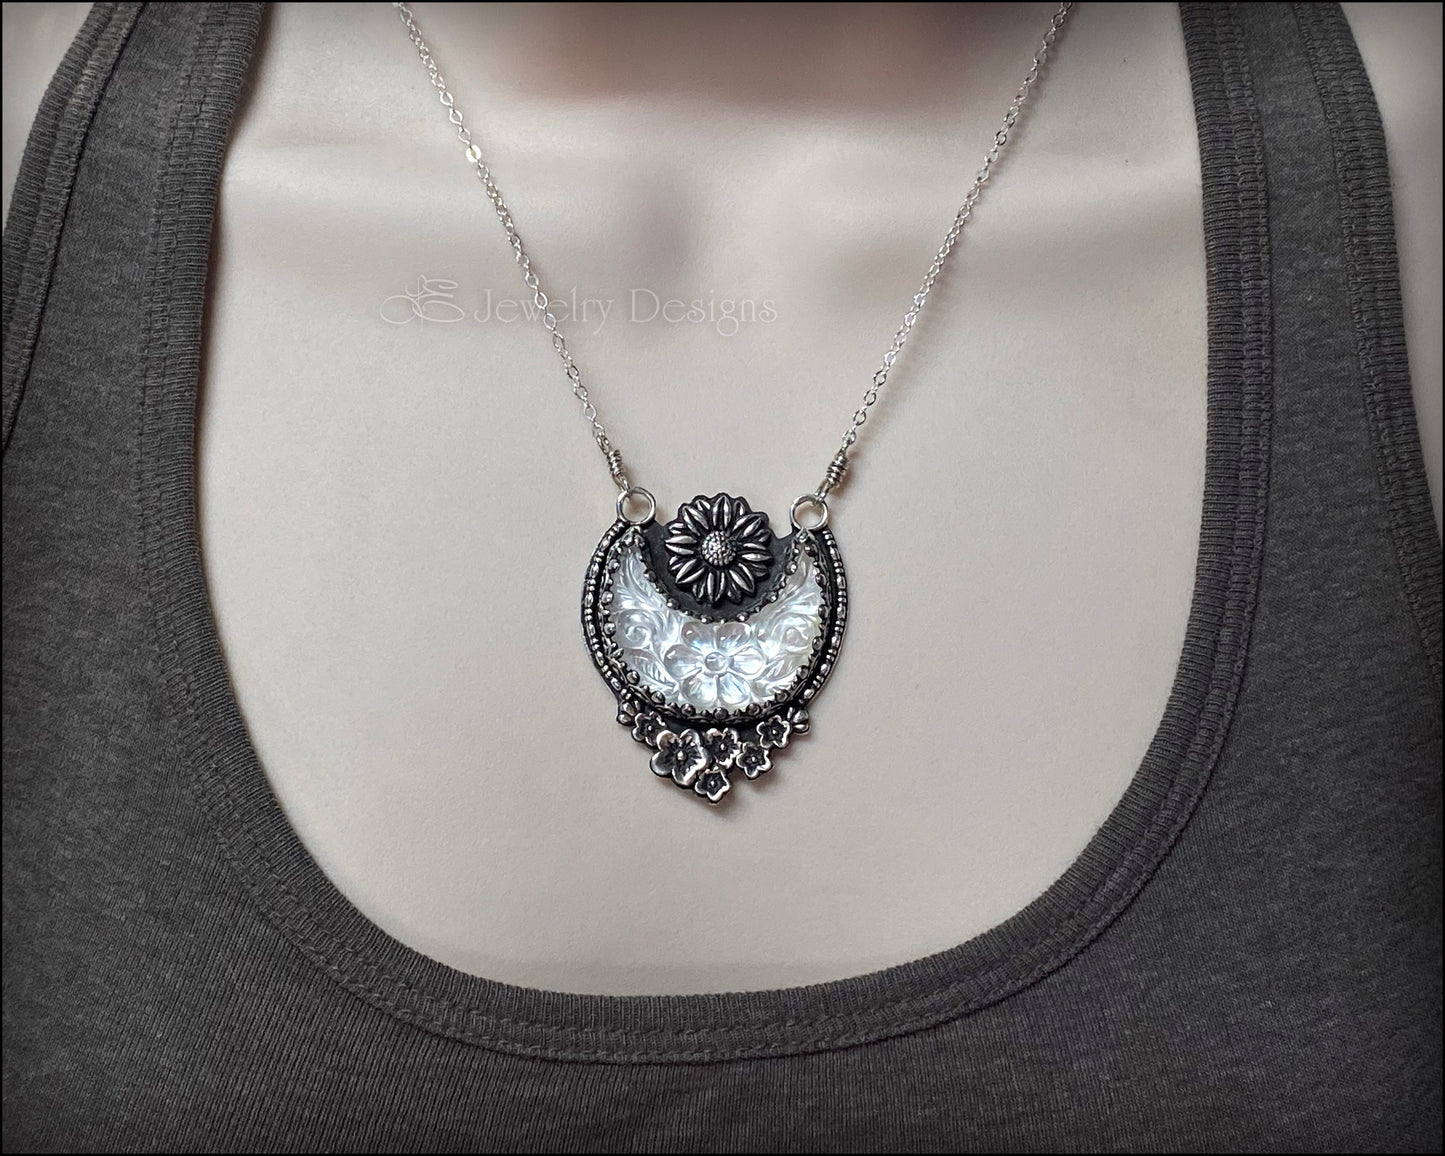 Load image into Gallery viewer, MOP Flower Moon Sterling Necklace - LE Jewelry Designs
